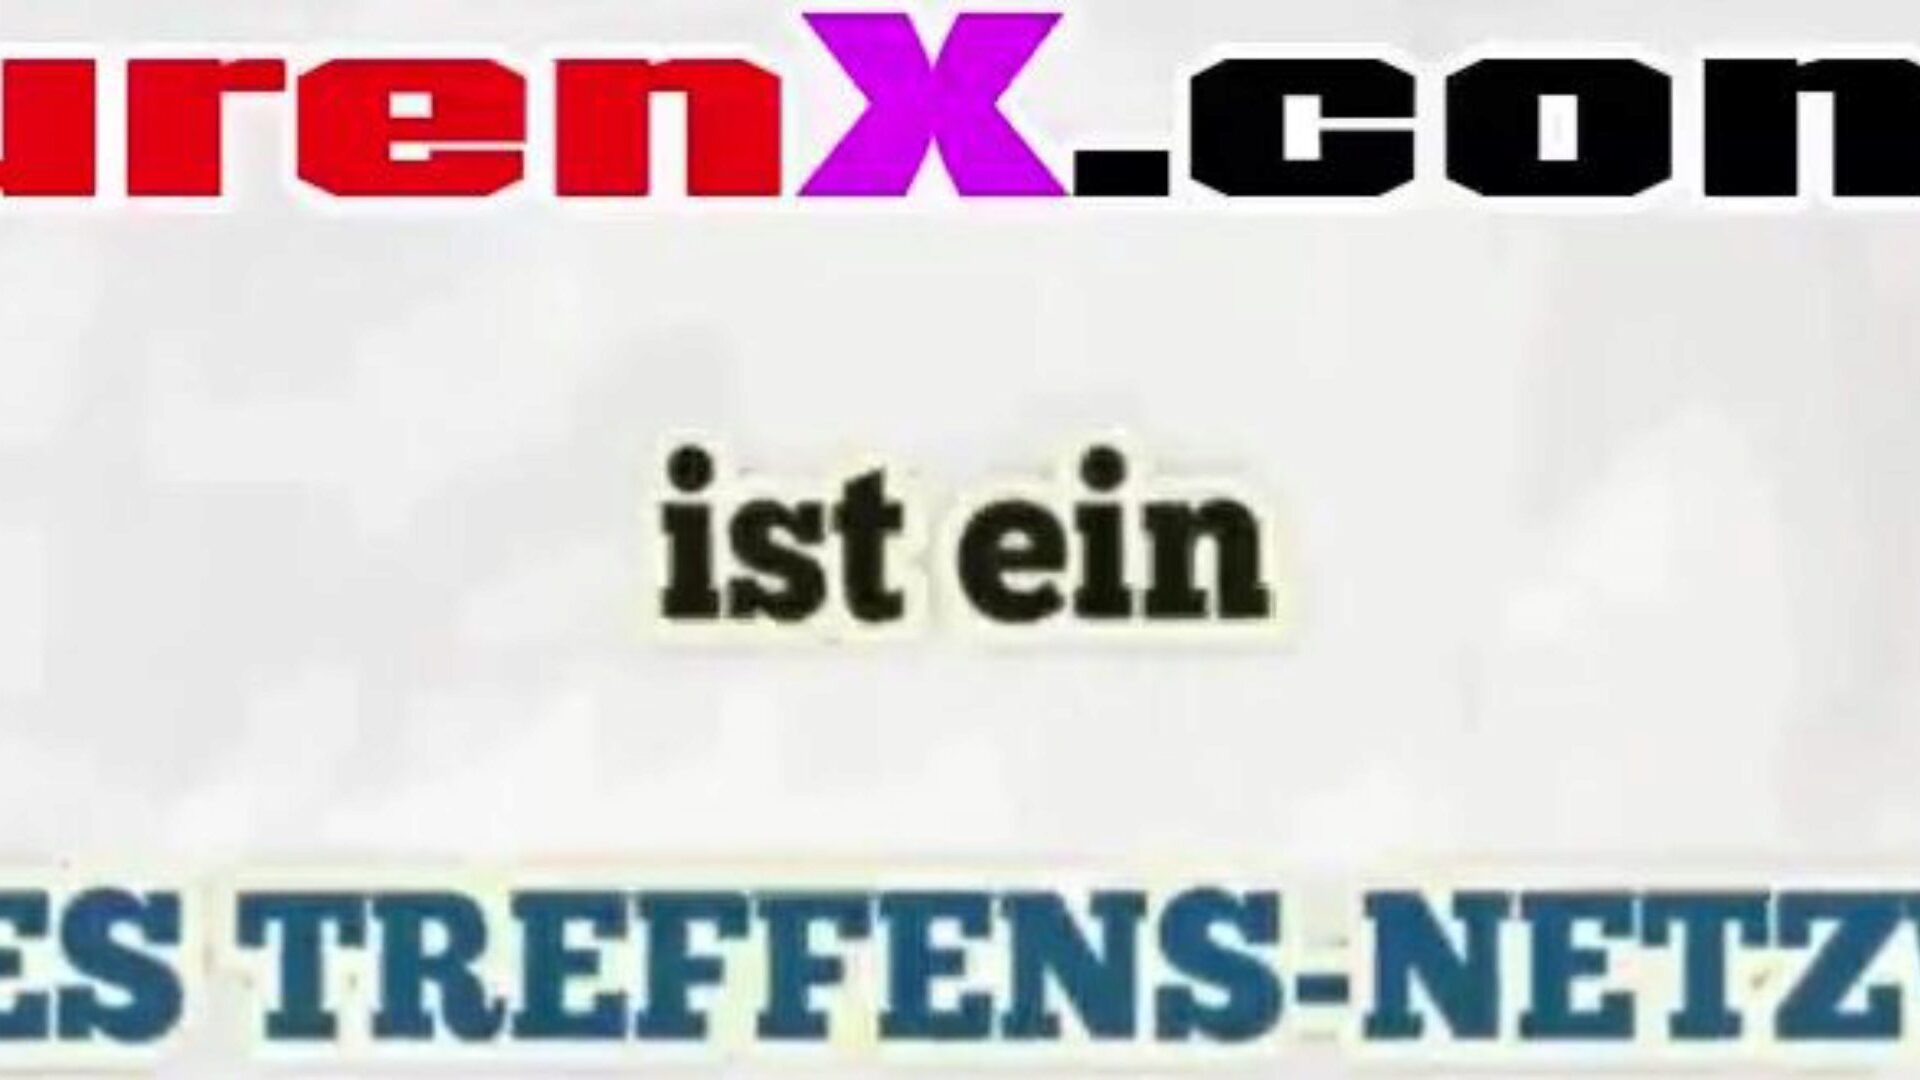 stiefmutter gefickt: gratuit mutter german hd porno video f5 ceas stiefmutter gefickt tube lovemaking video for free for all on xhamster, with the amazing bevy of german mutter german & mutter tochter hd porno film concert concert